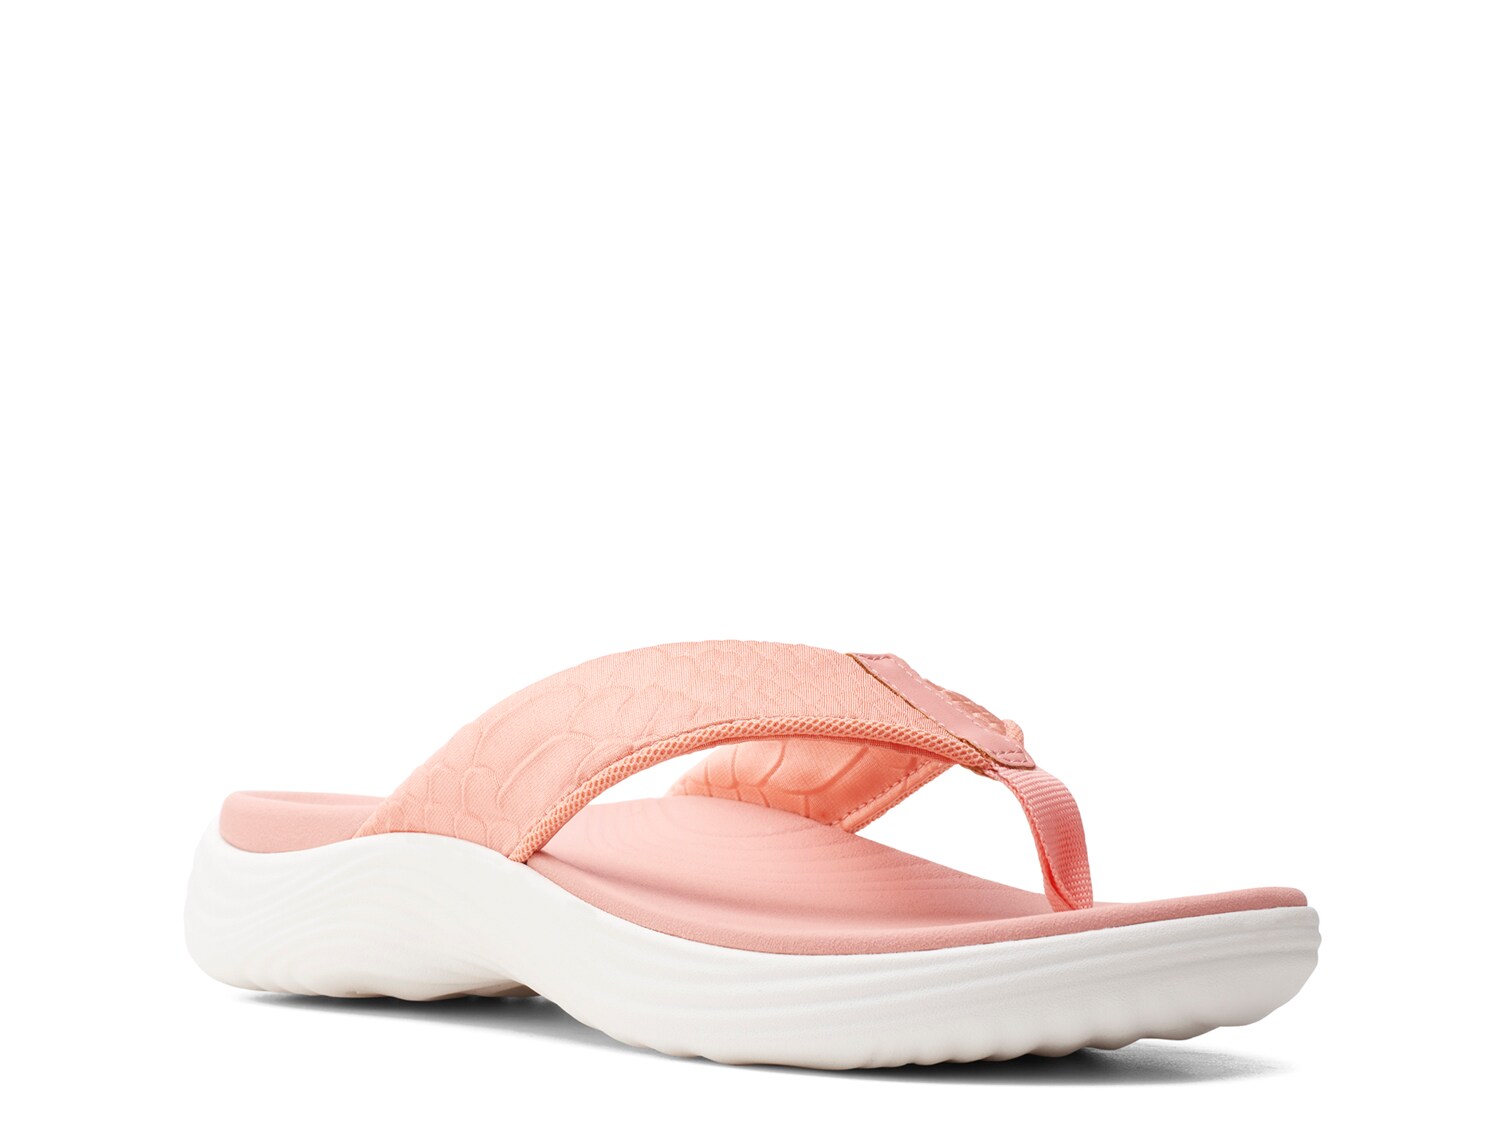 clarks cloudsteppers thong sandals